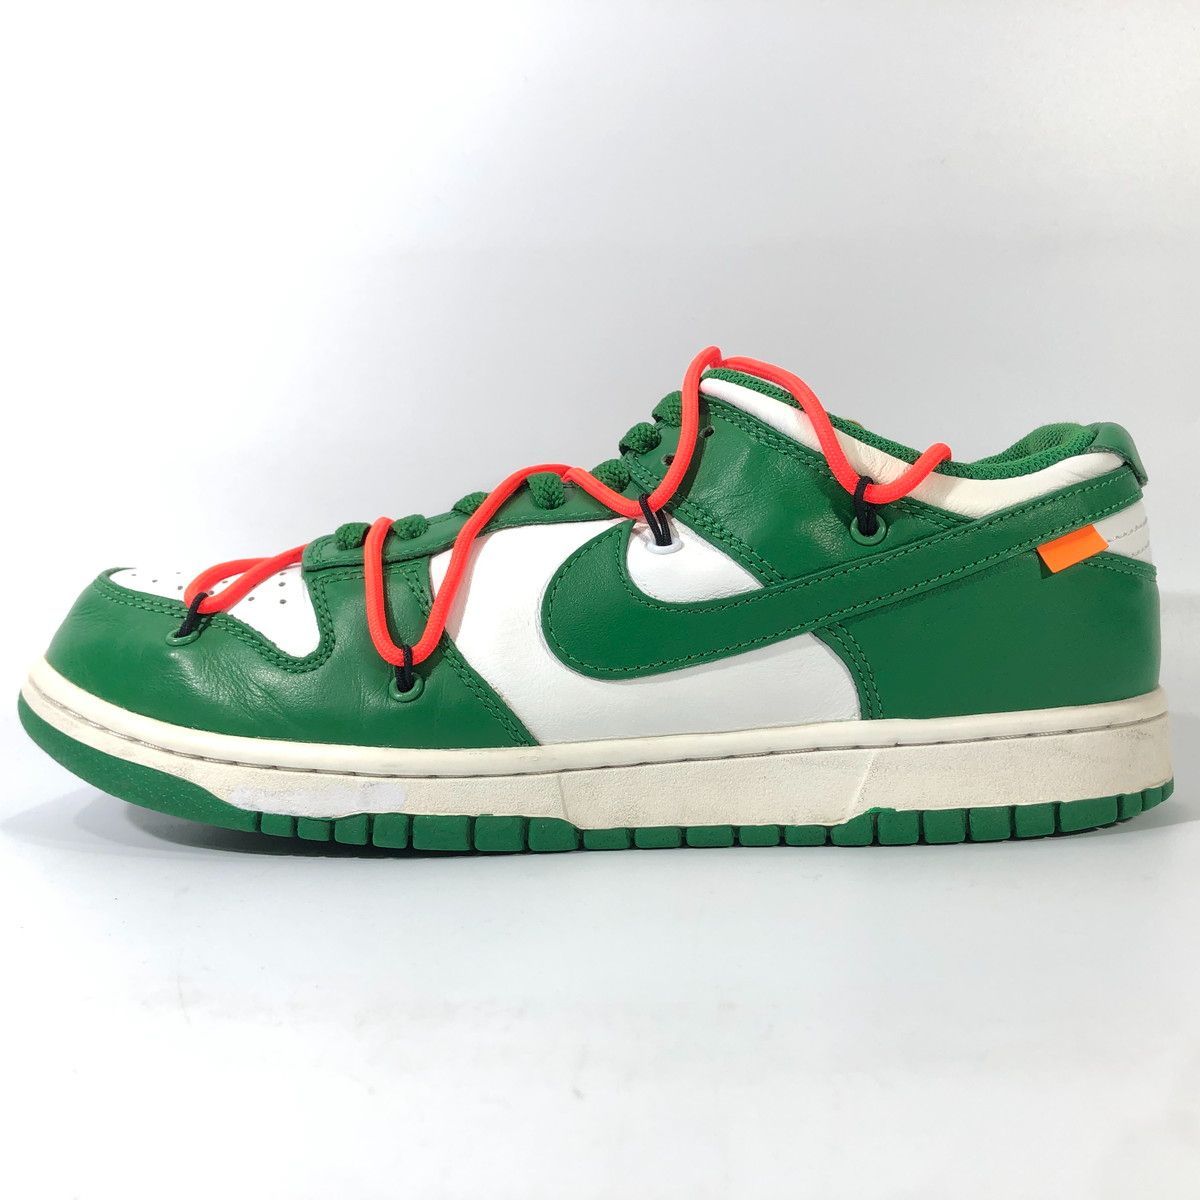 NIKE ナイキ OFF WHITE DUNK LOW LTHR / OW CT0856-100 27.5cm US9.5 宅急便